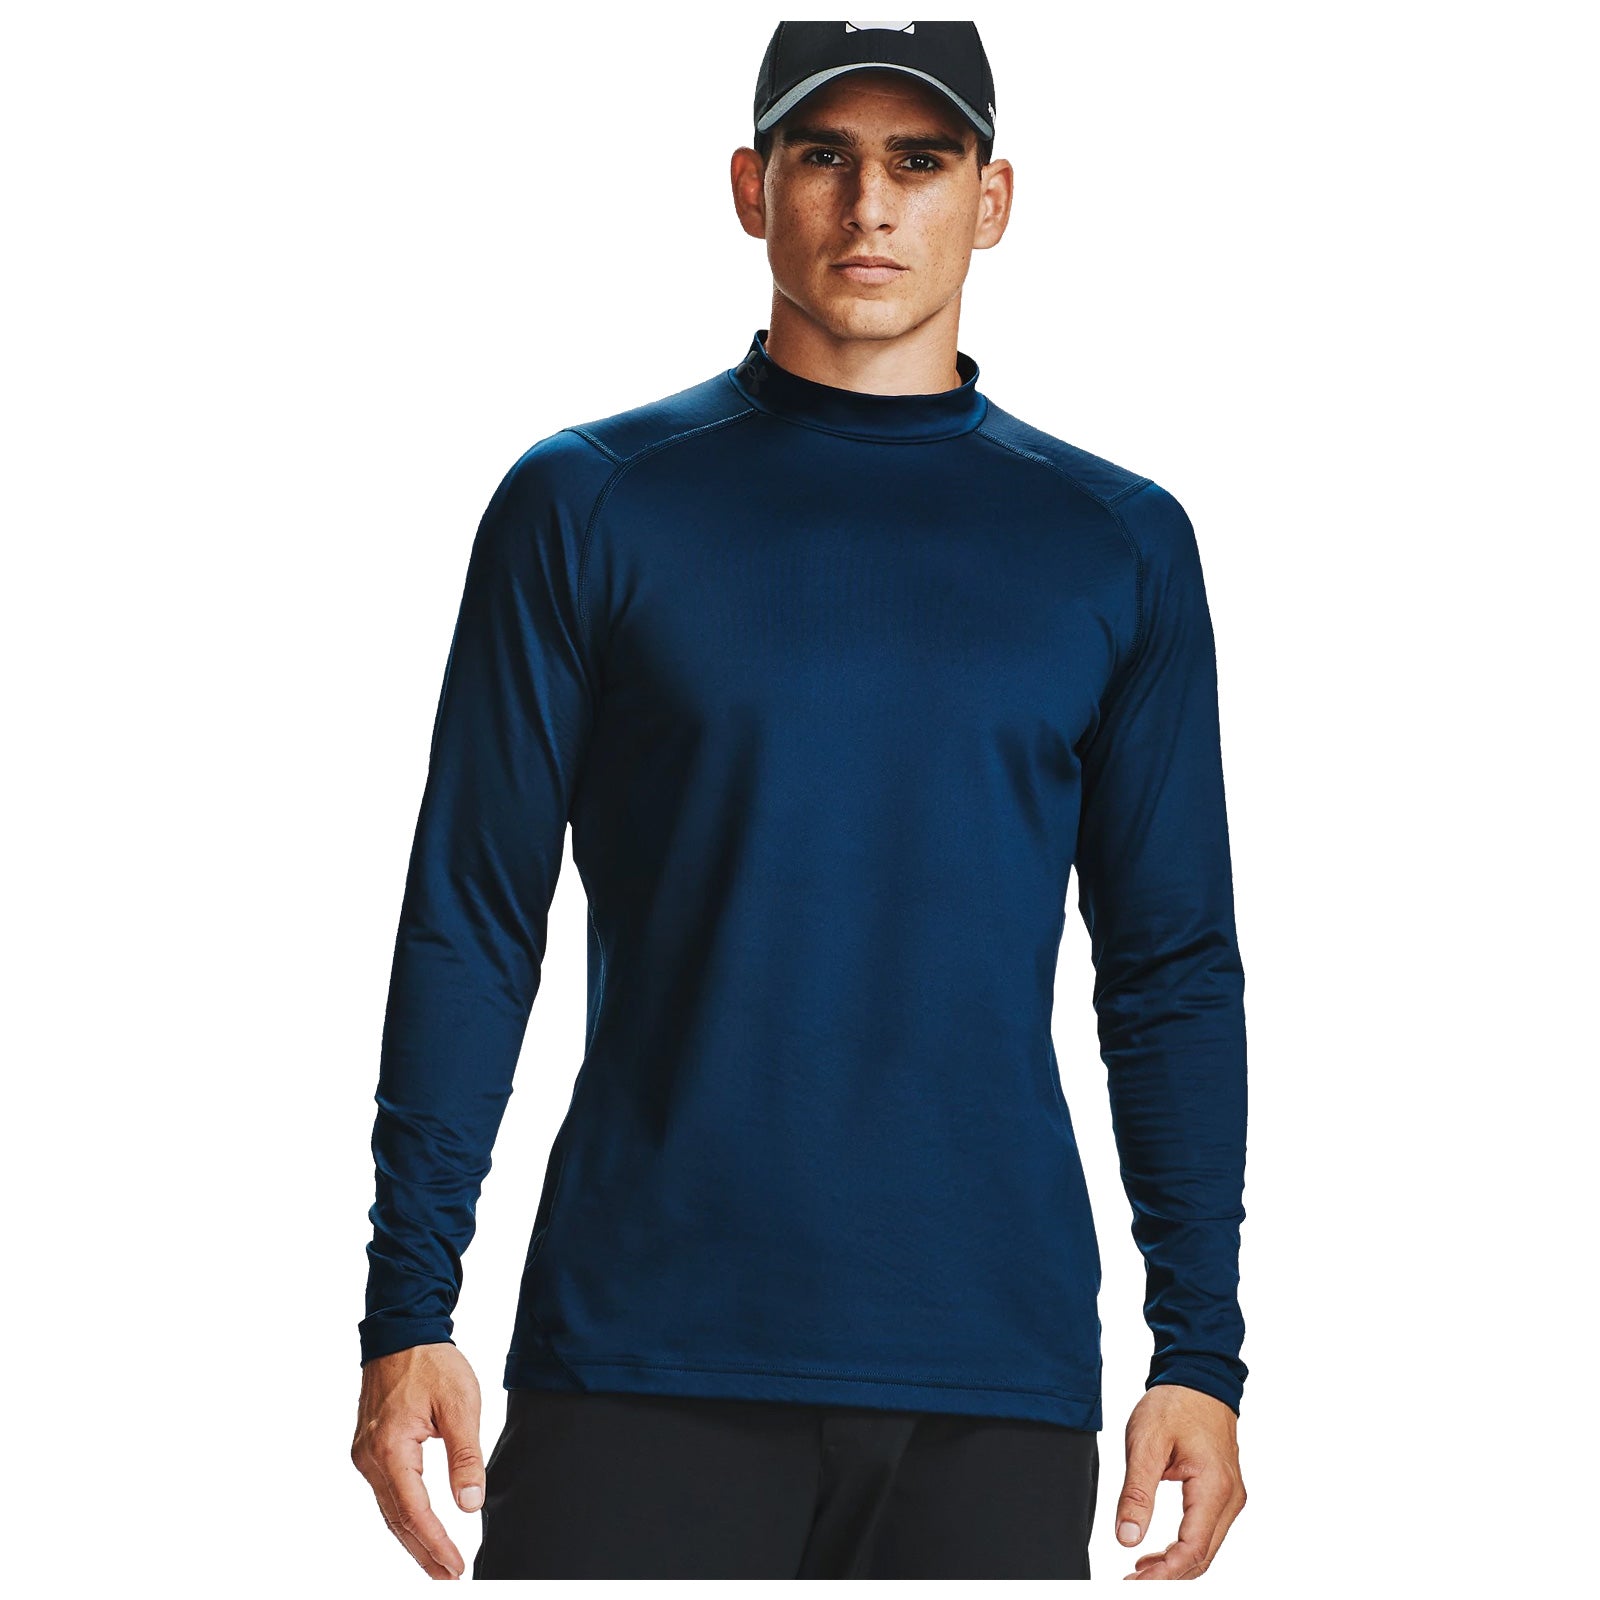 Under Armour Mens ColdGear Infrared Mock Top – More Sports